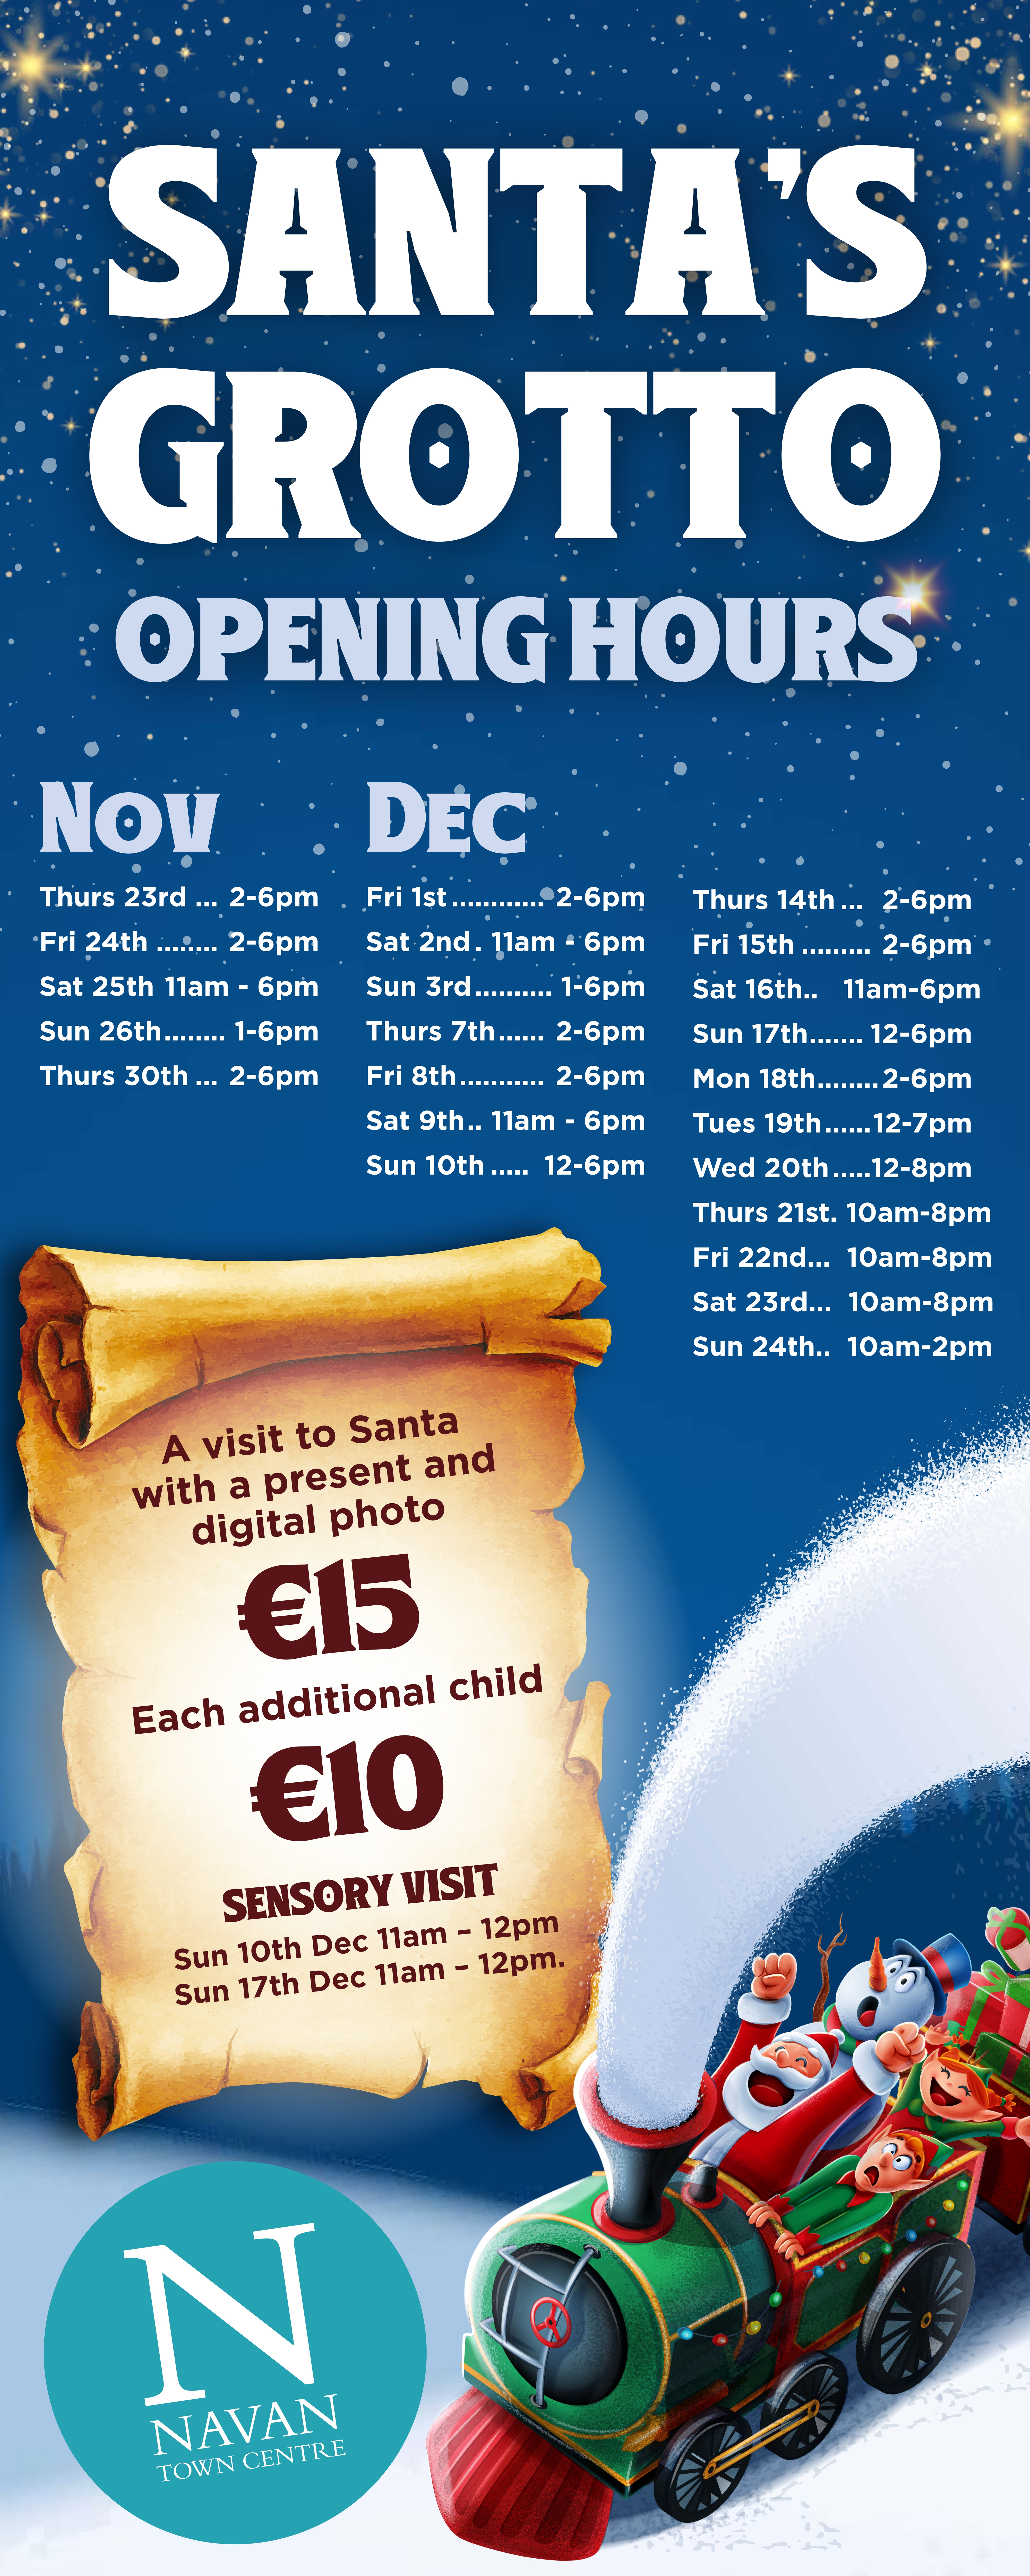 Santa's Grotto Opening Hours and Price List!